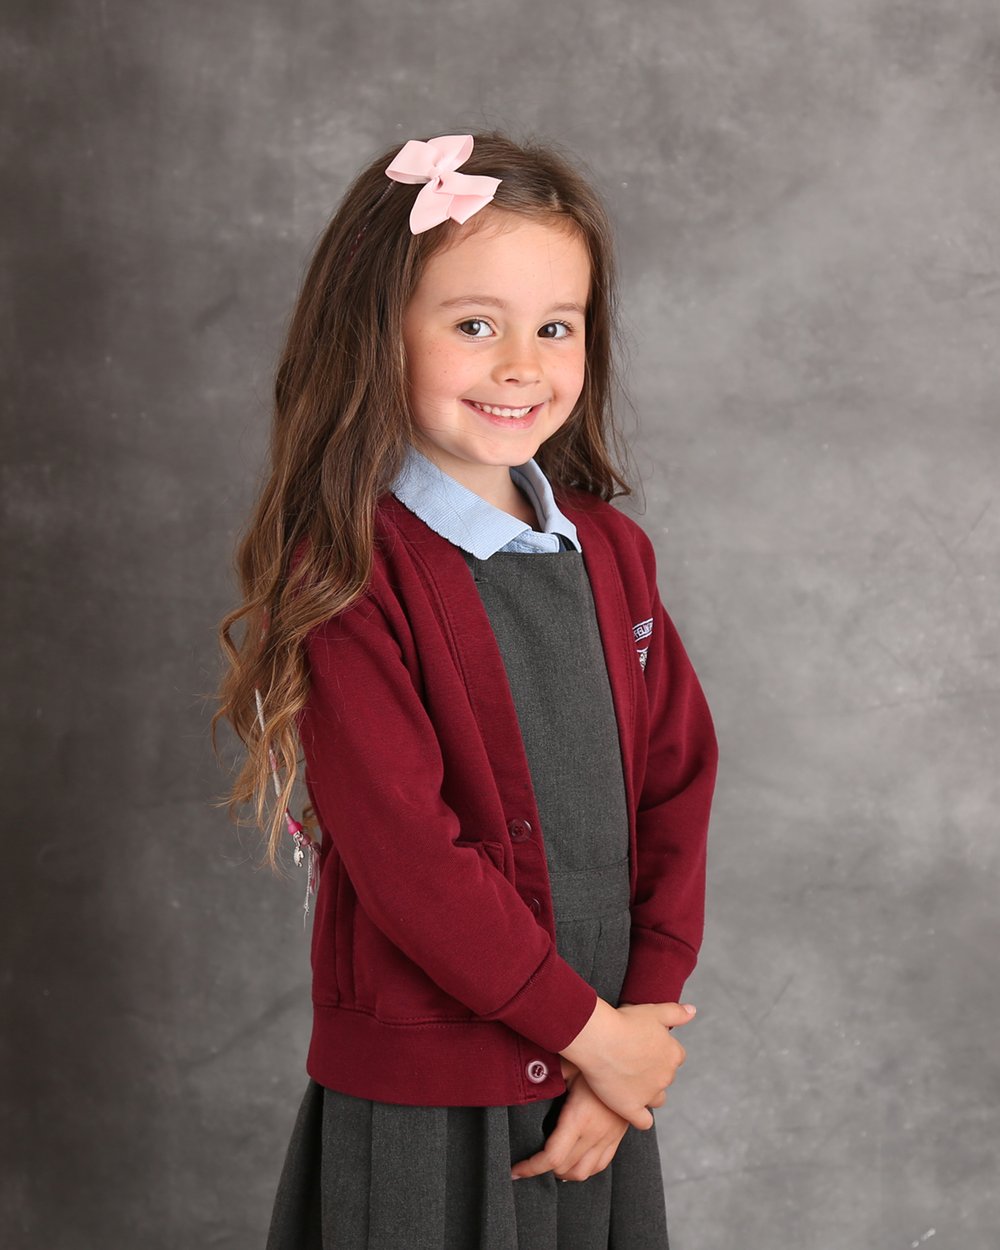 Image of SCHOOL PHOTOS DAY - Sat 2 Sept SOLD OUT